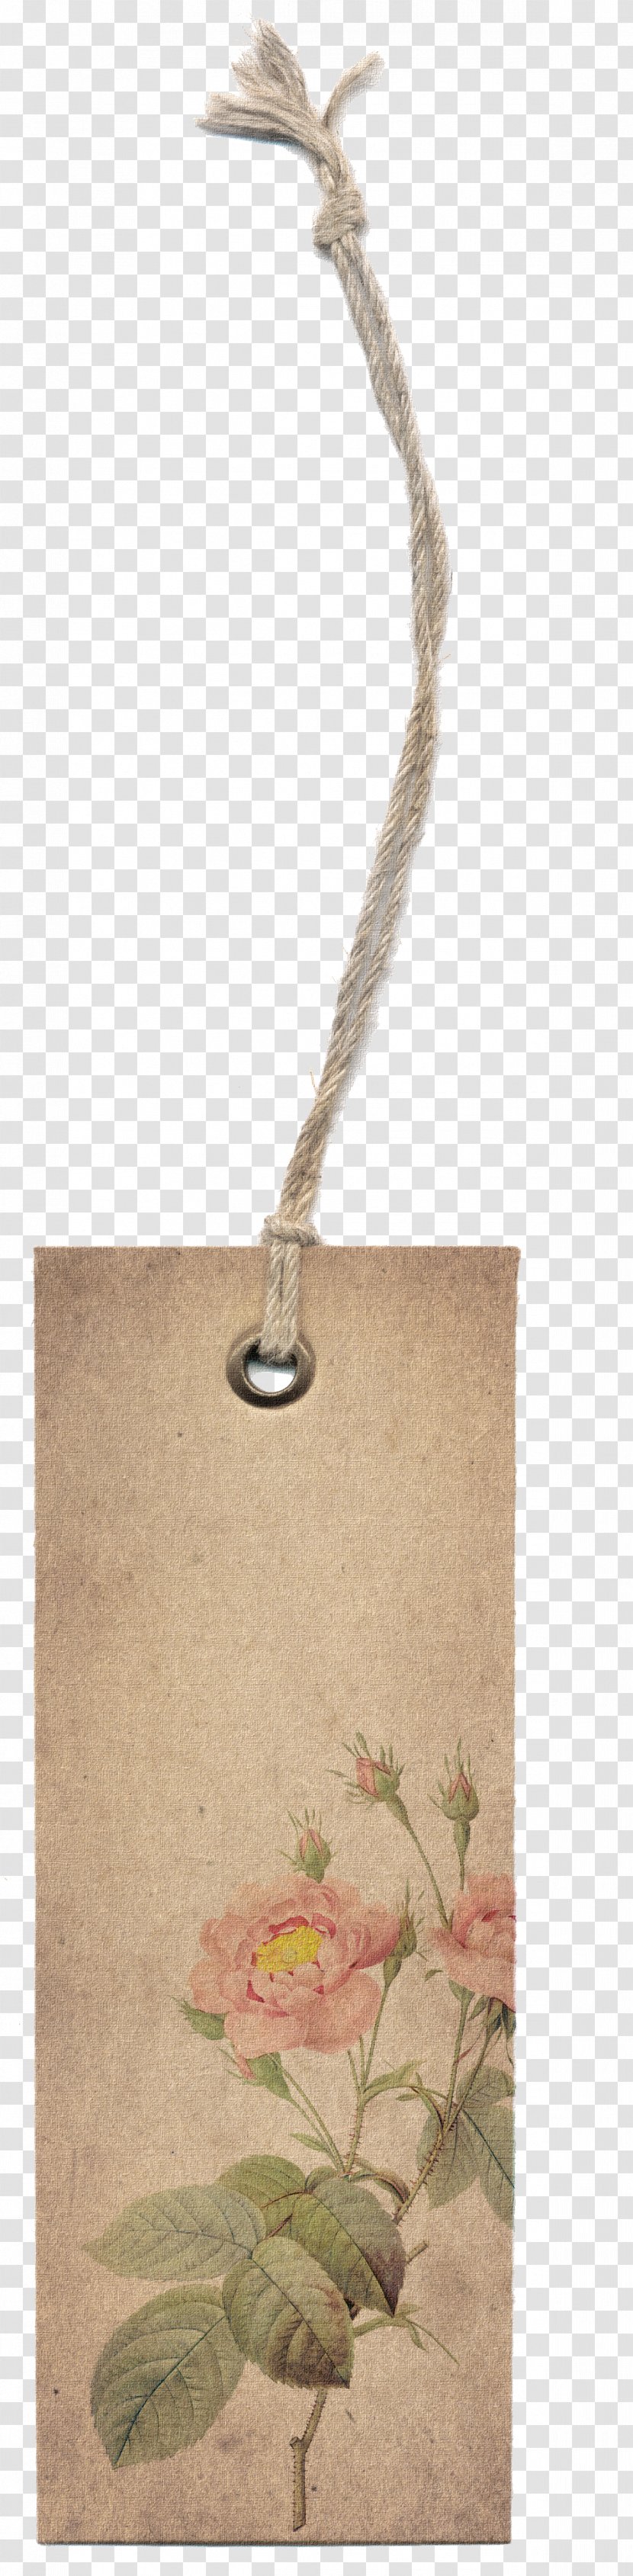 Rope Hemp Icon - Twine Tag Transparent PNG